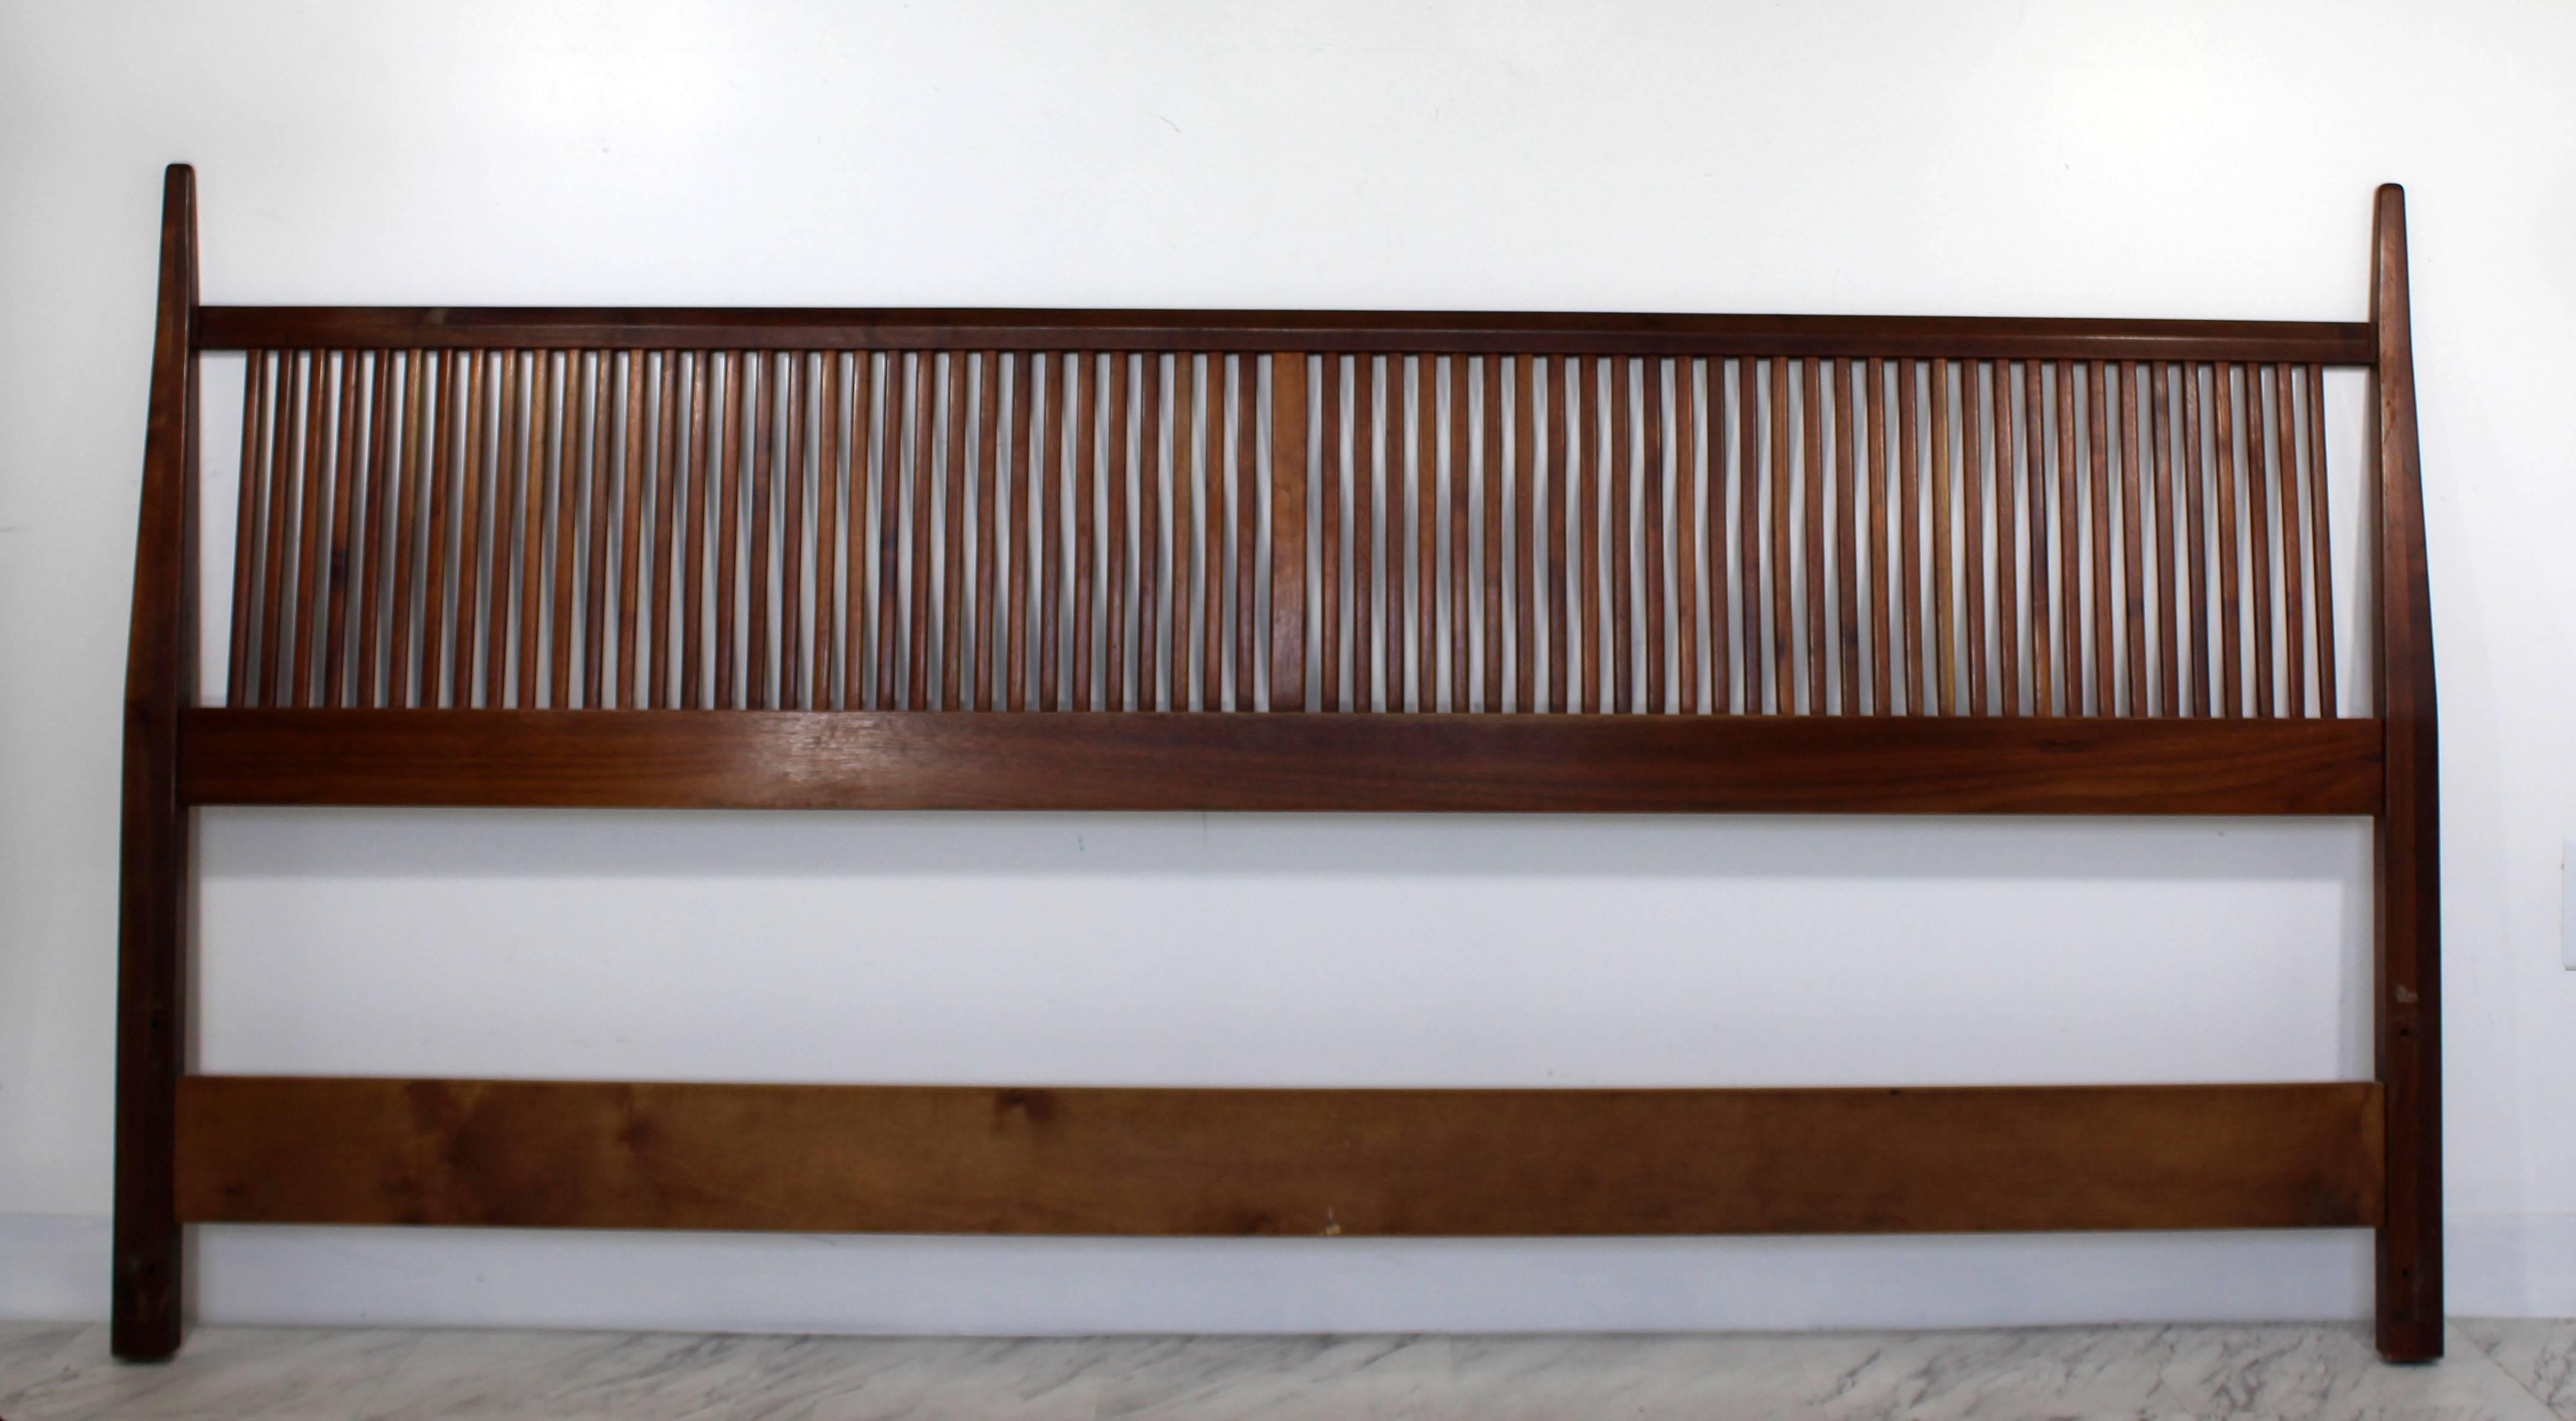 For your consideration is a marvellous, king sized headboard, designed by George Nakashima for Widdicomb, circa the 1950s. In excellent condition. The dimensions are 80" W x 41" H.